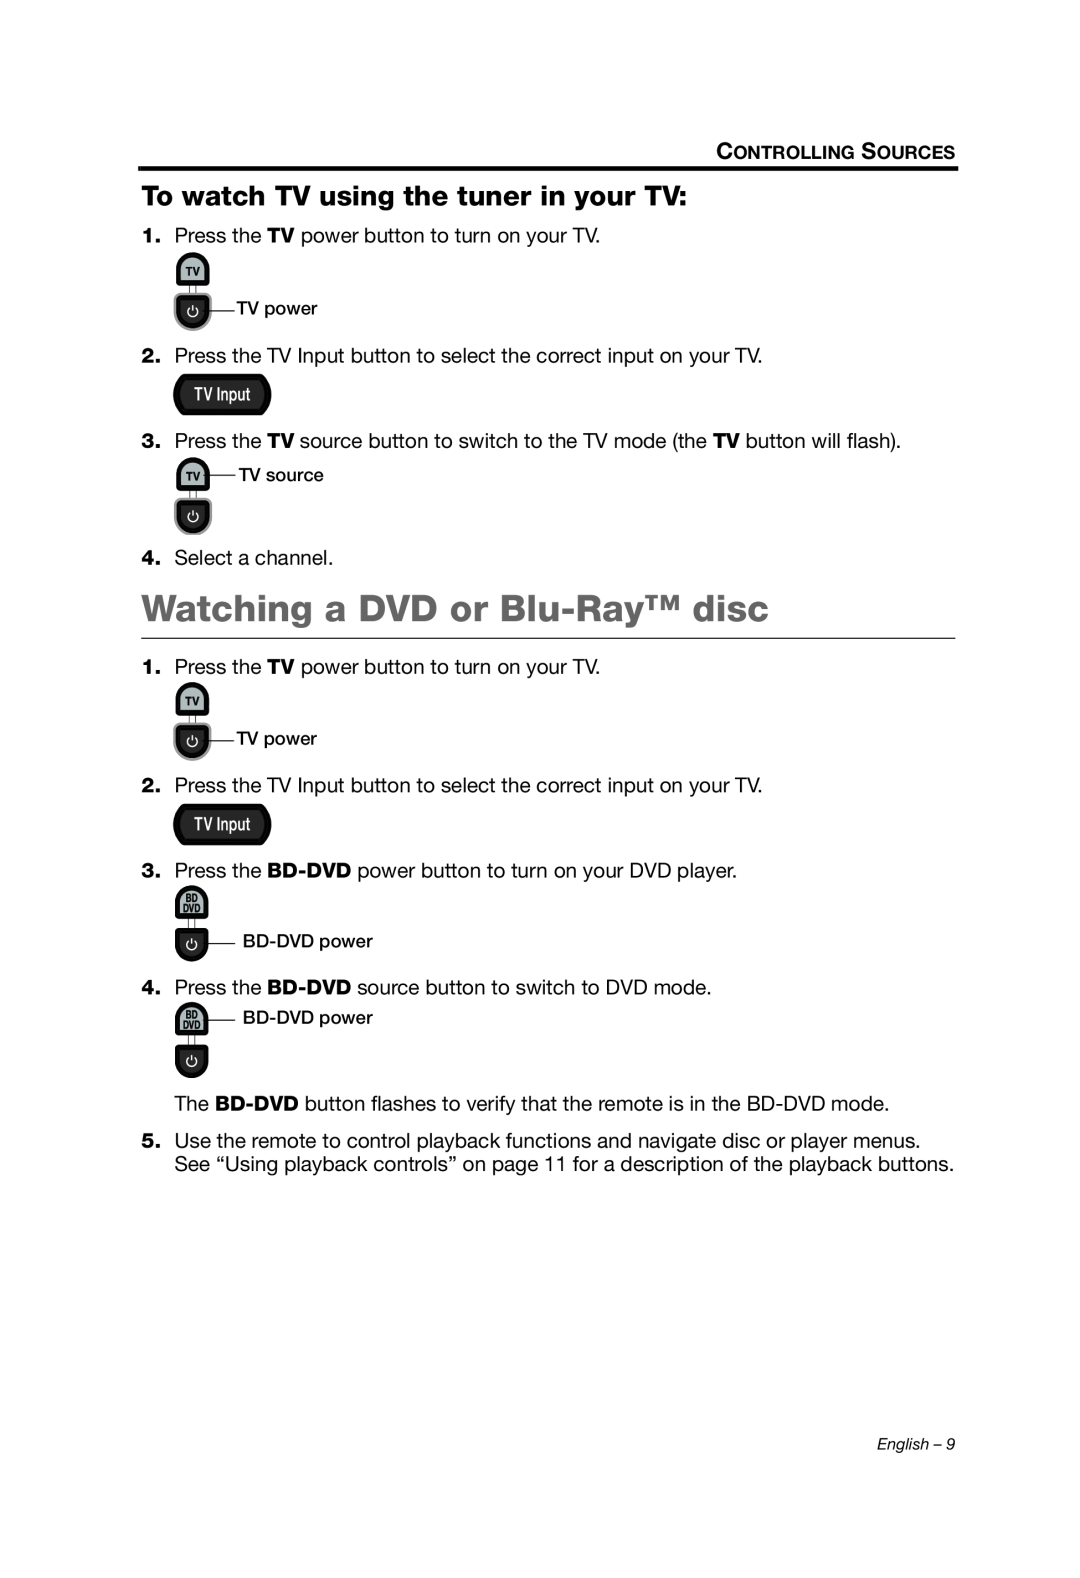 Bose 1 SR manual Watching a DVD or Blu-Raydisc, To watch TV using the tuner in your TV 